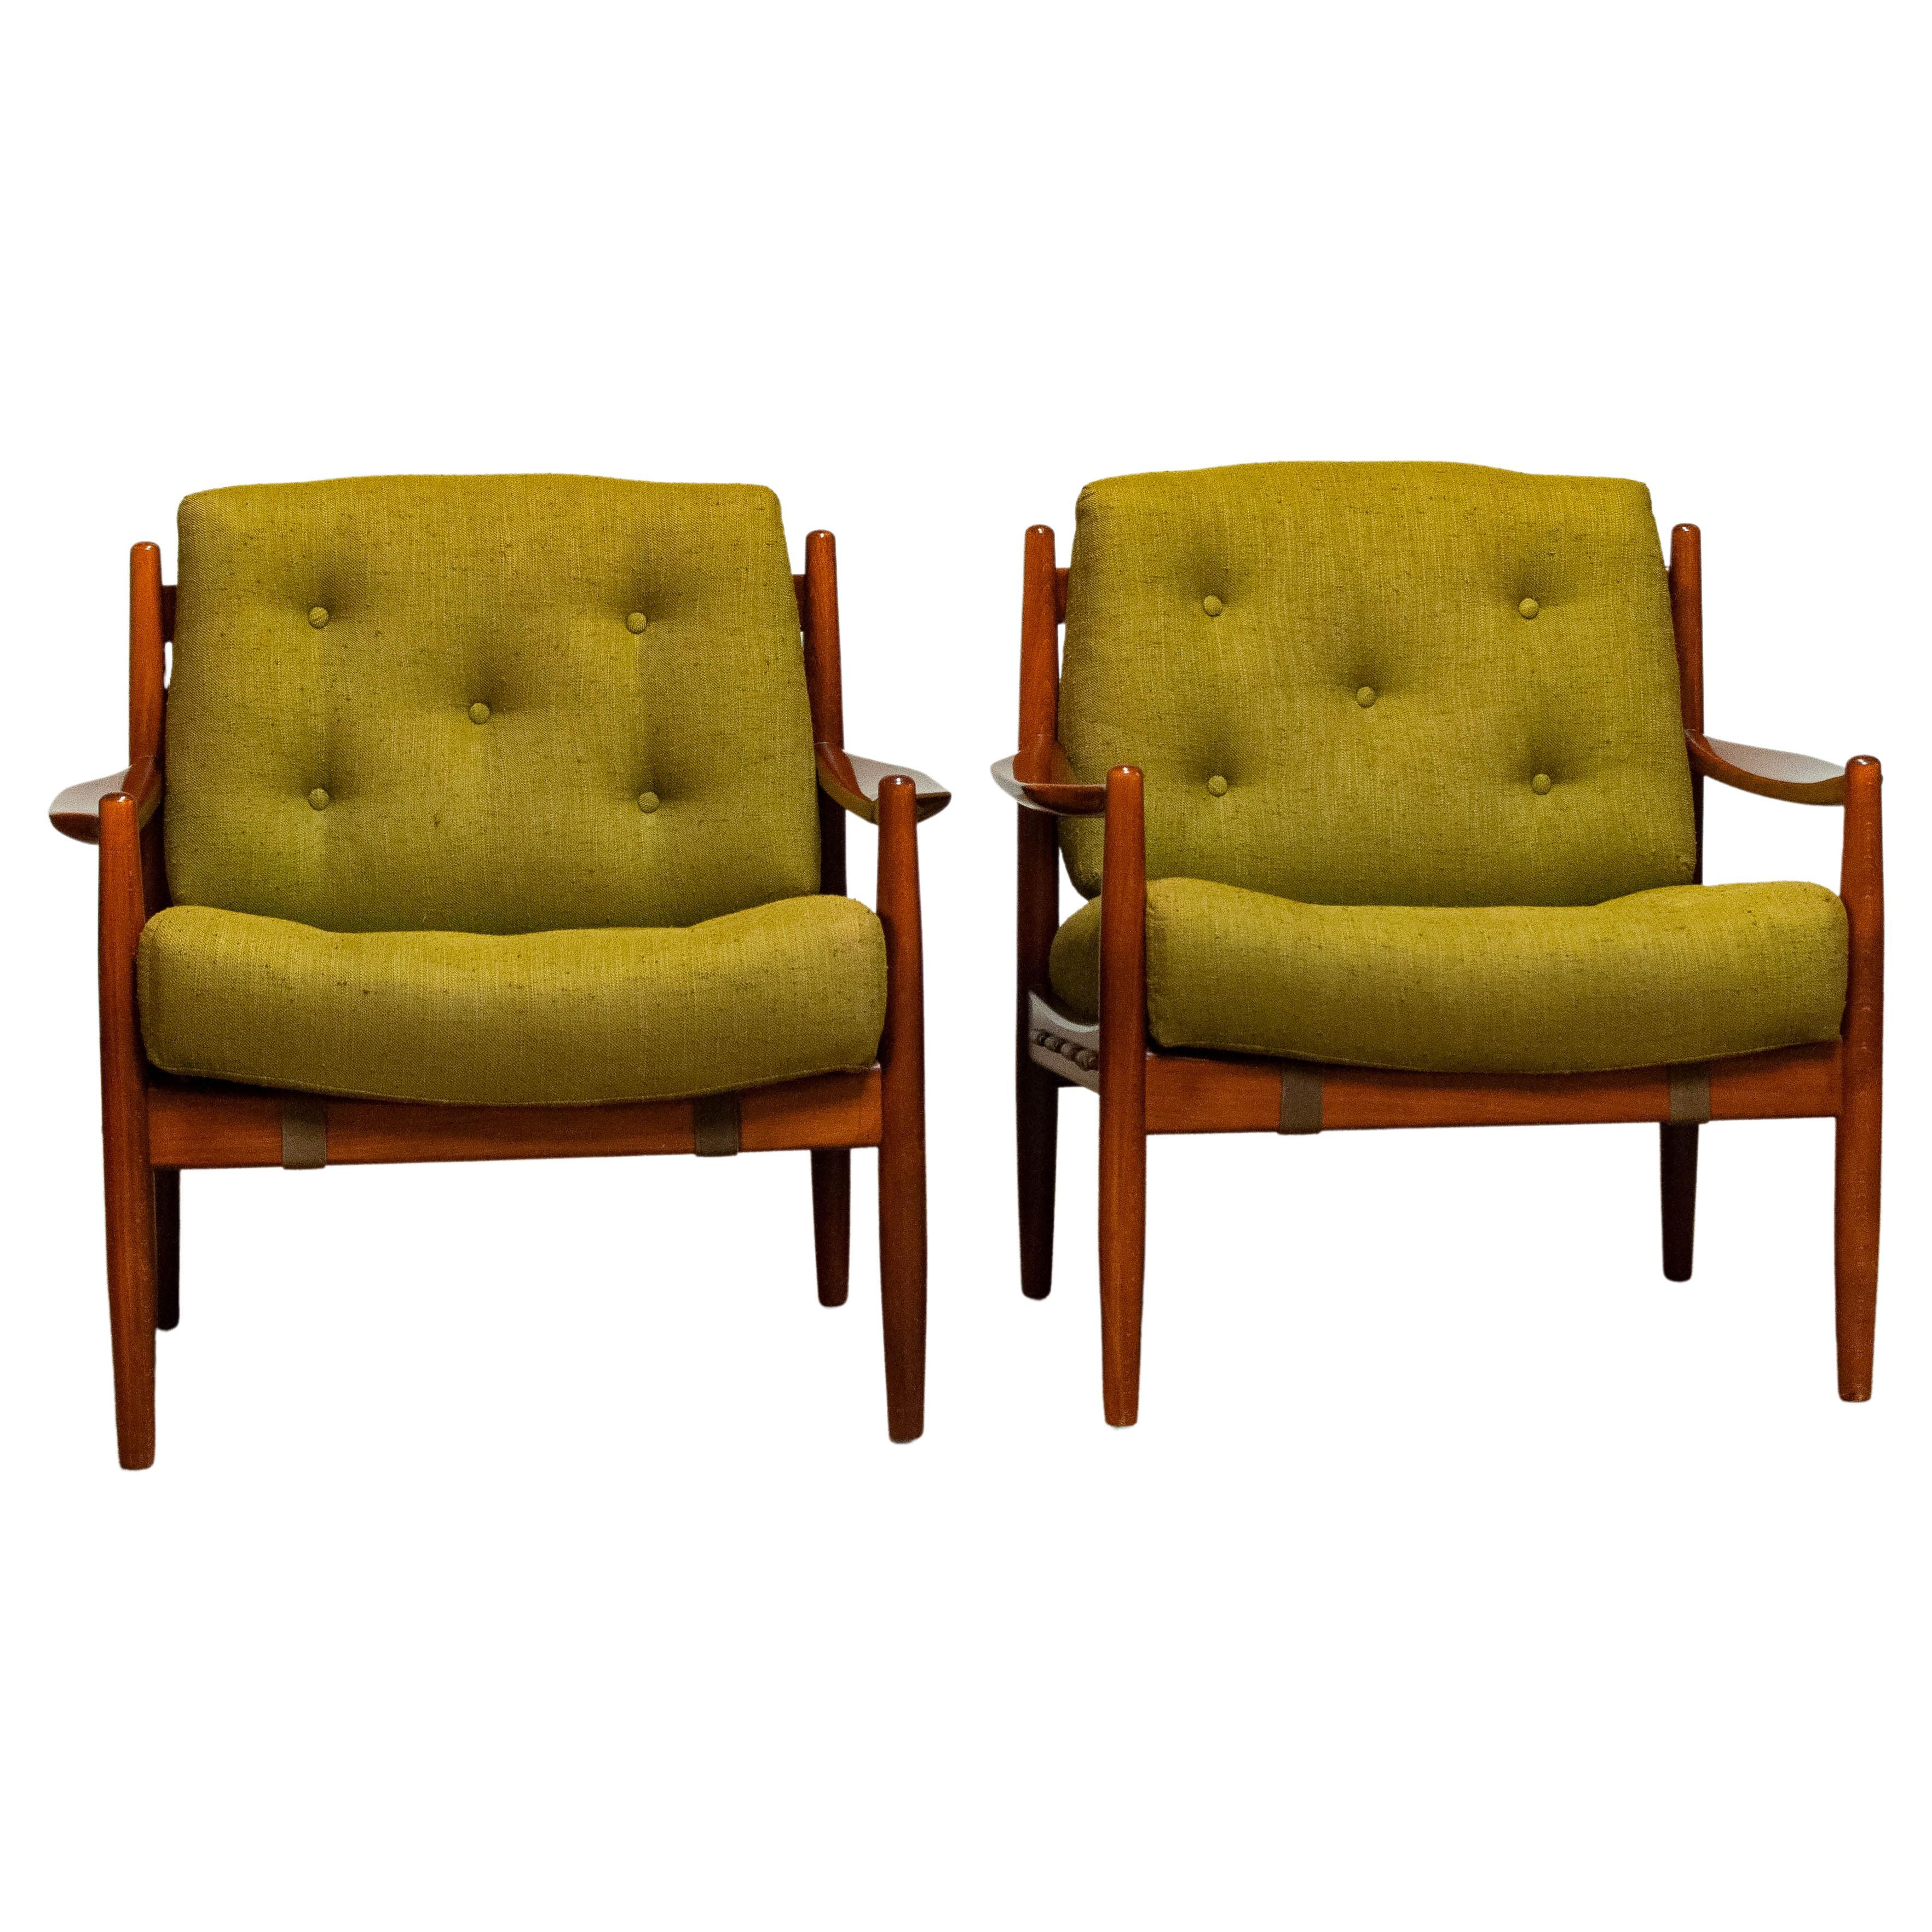 Pair 1960's Green Linen 'Läckö' Lounge Chairs By Ingemar Thillmark For OPE For Sale